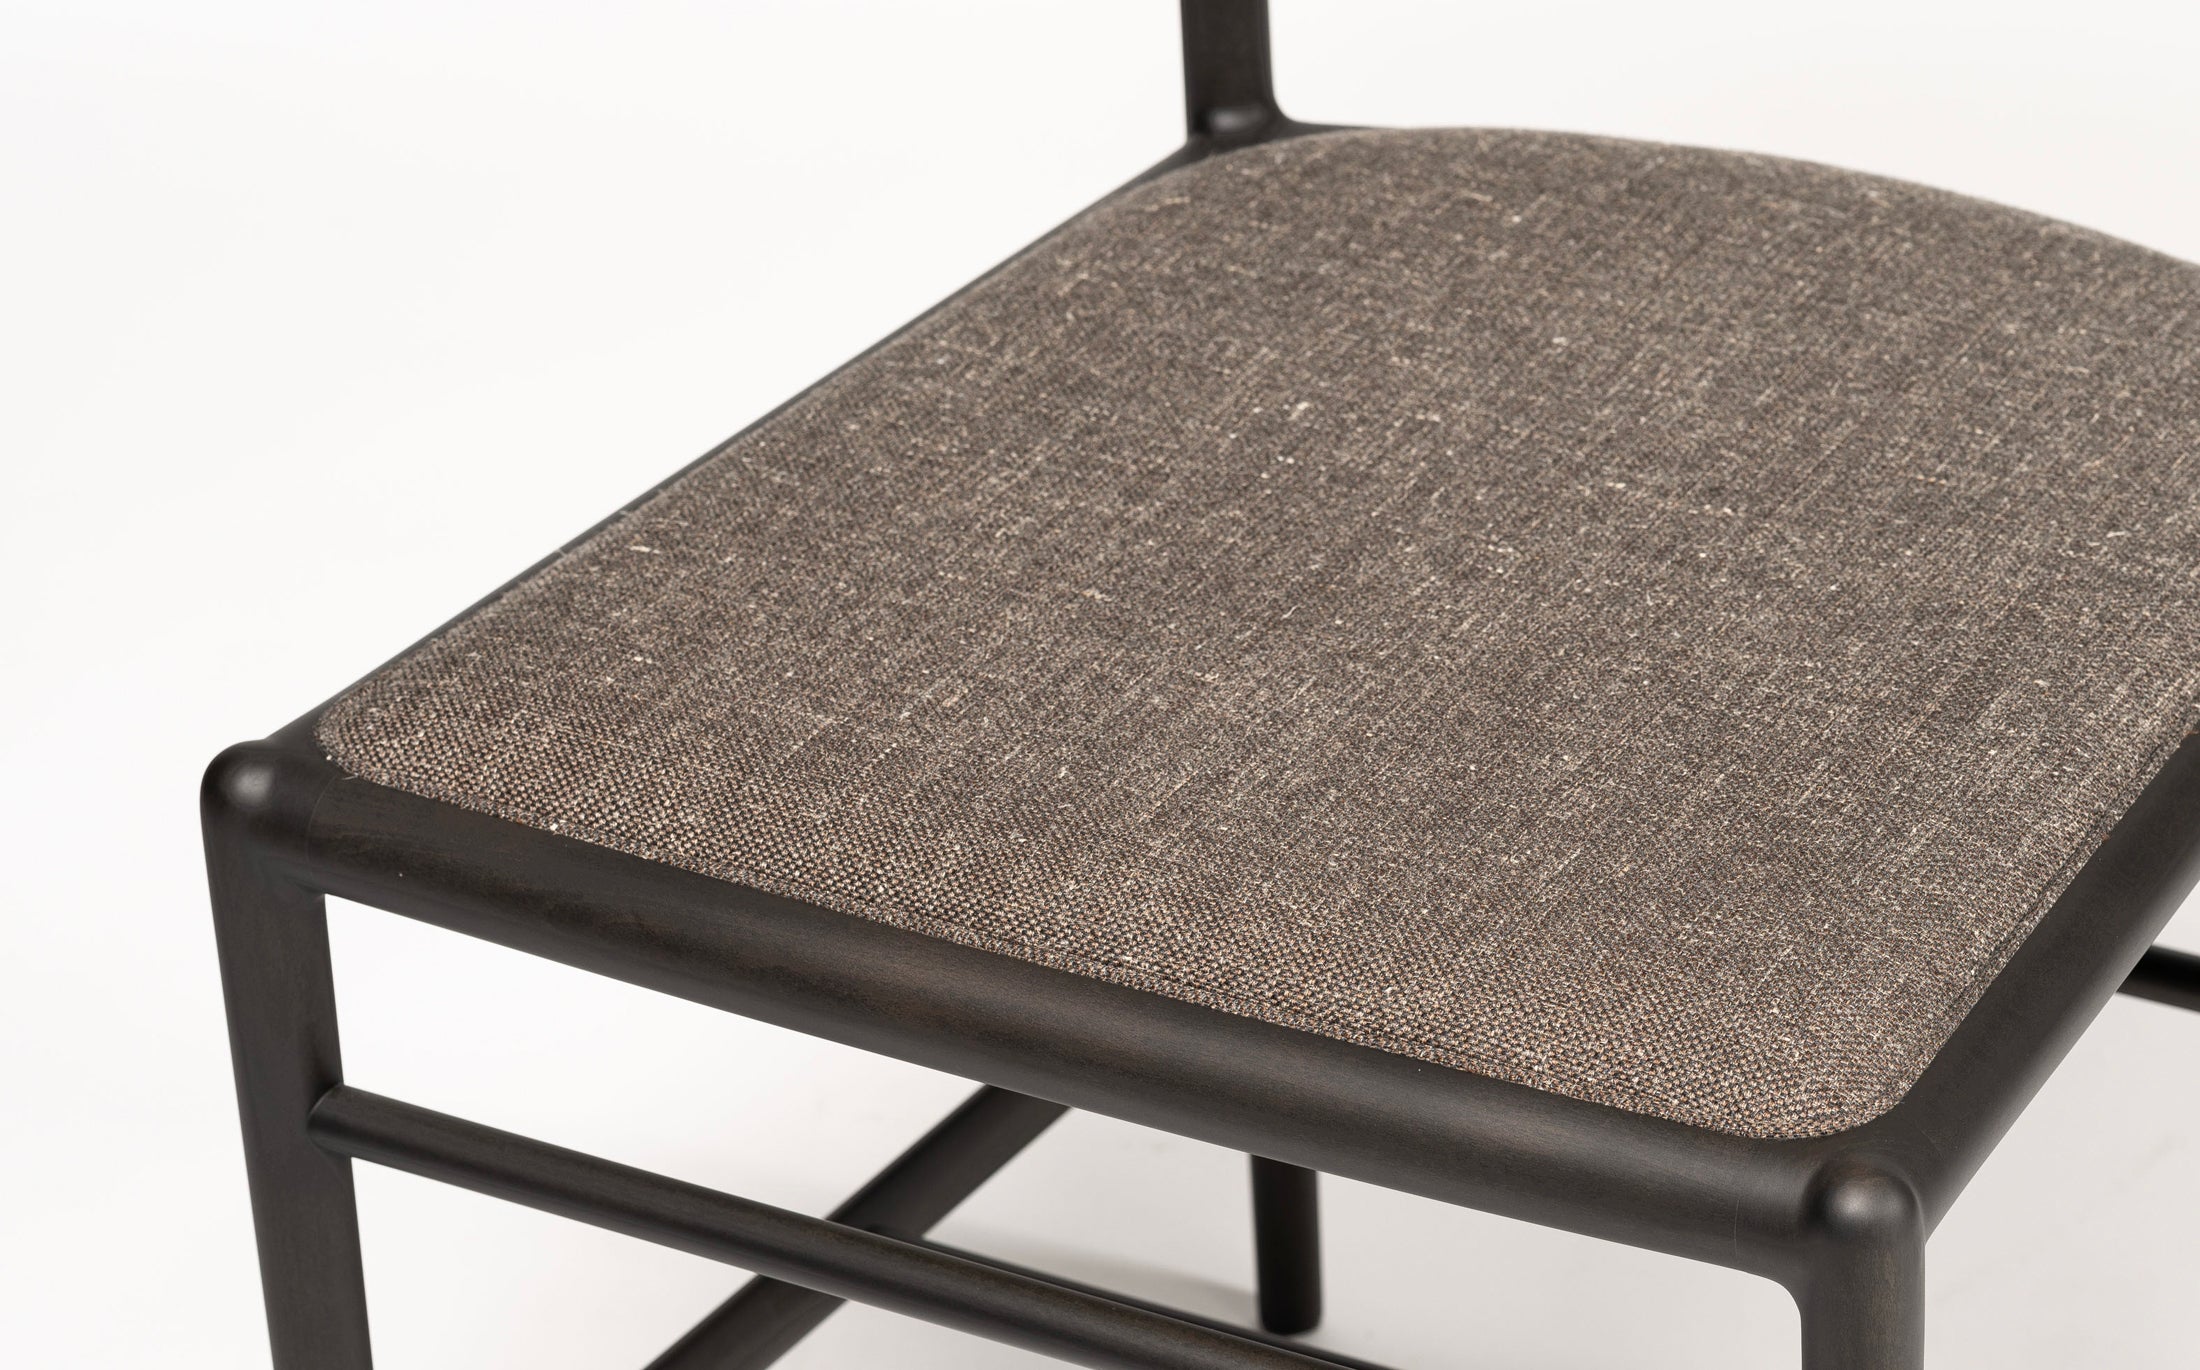 a chair on the vertical axis - sidechair - Charcoal grey